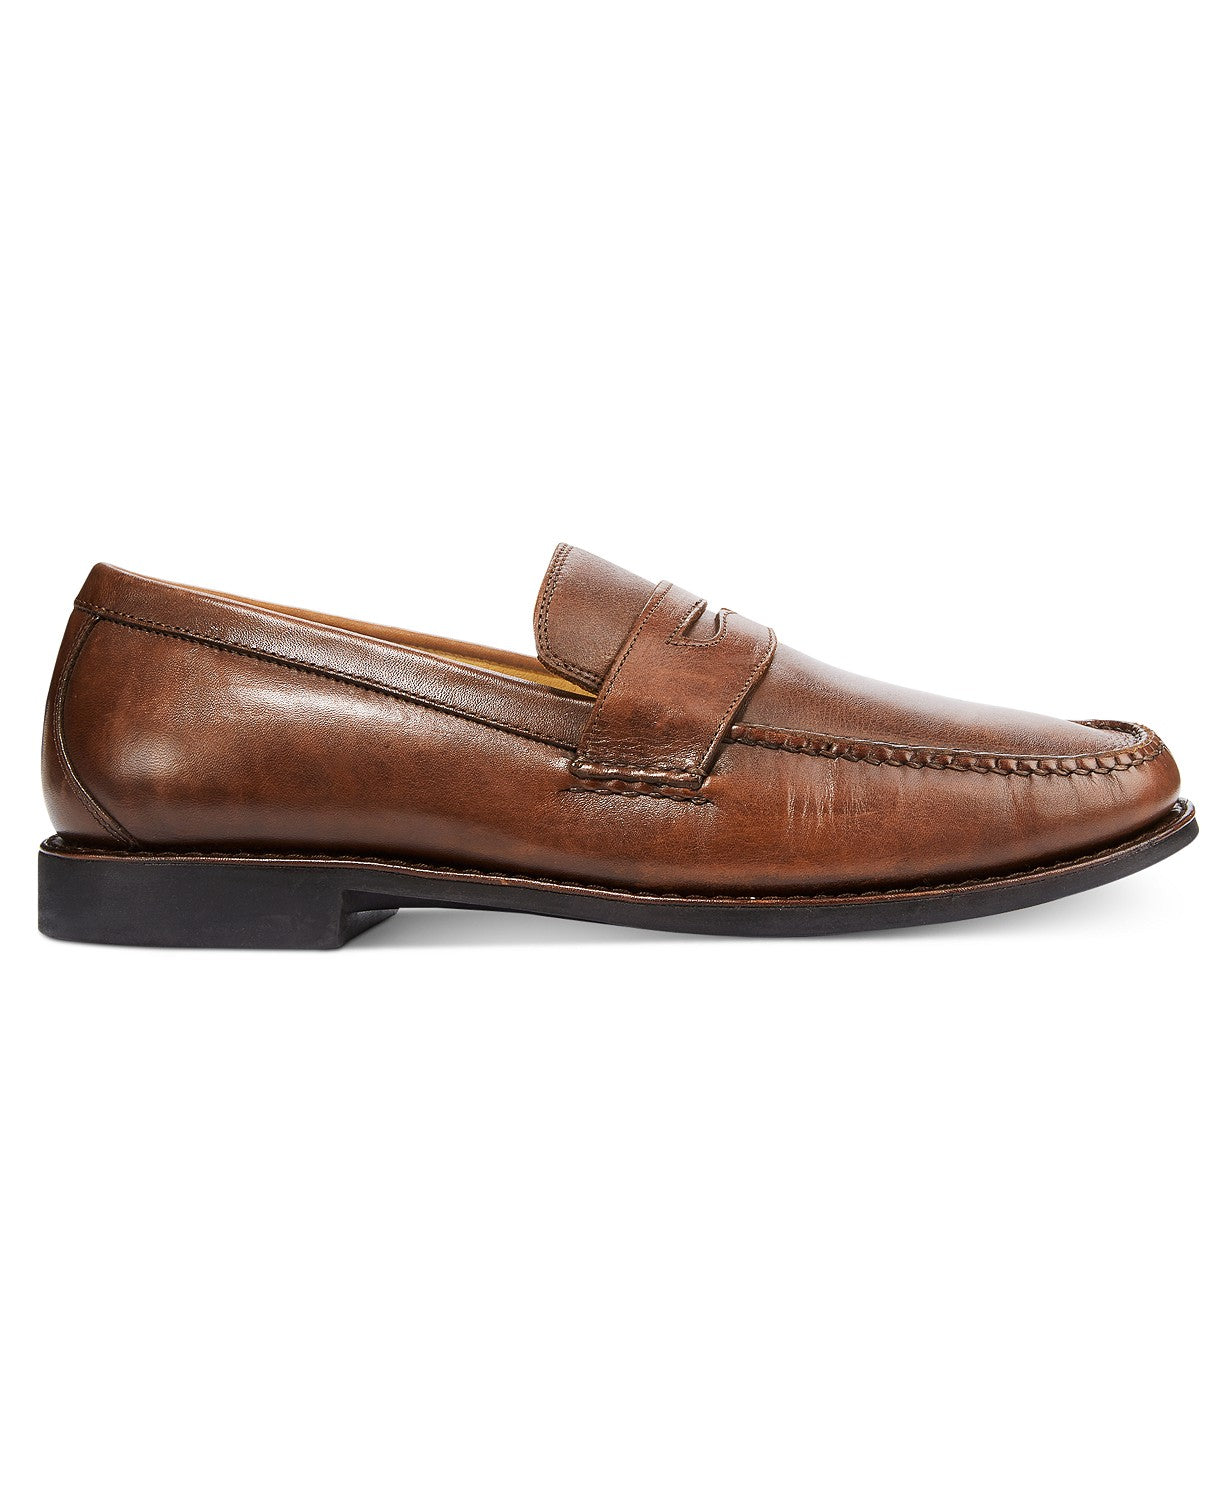 johnston and murphy ainsworth penny loafer